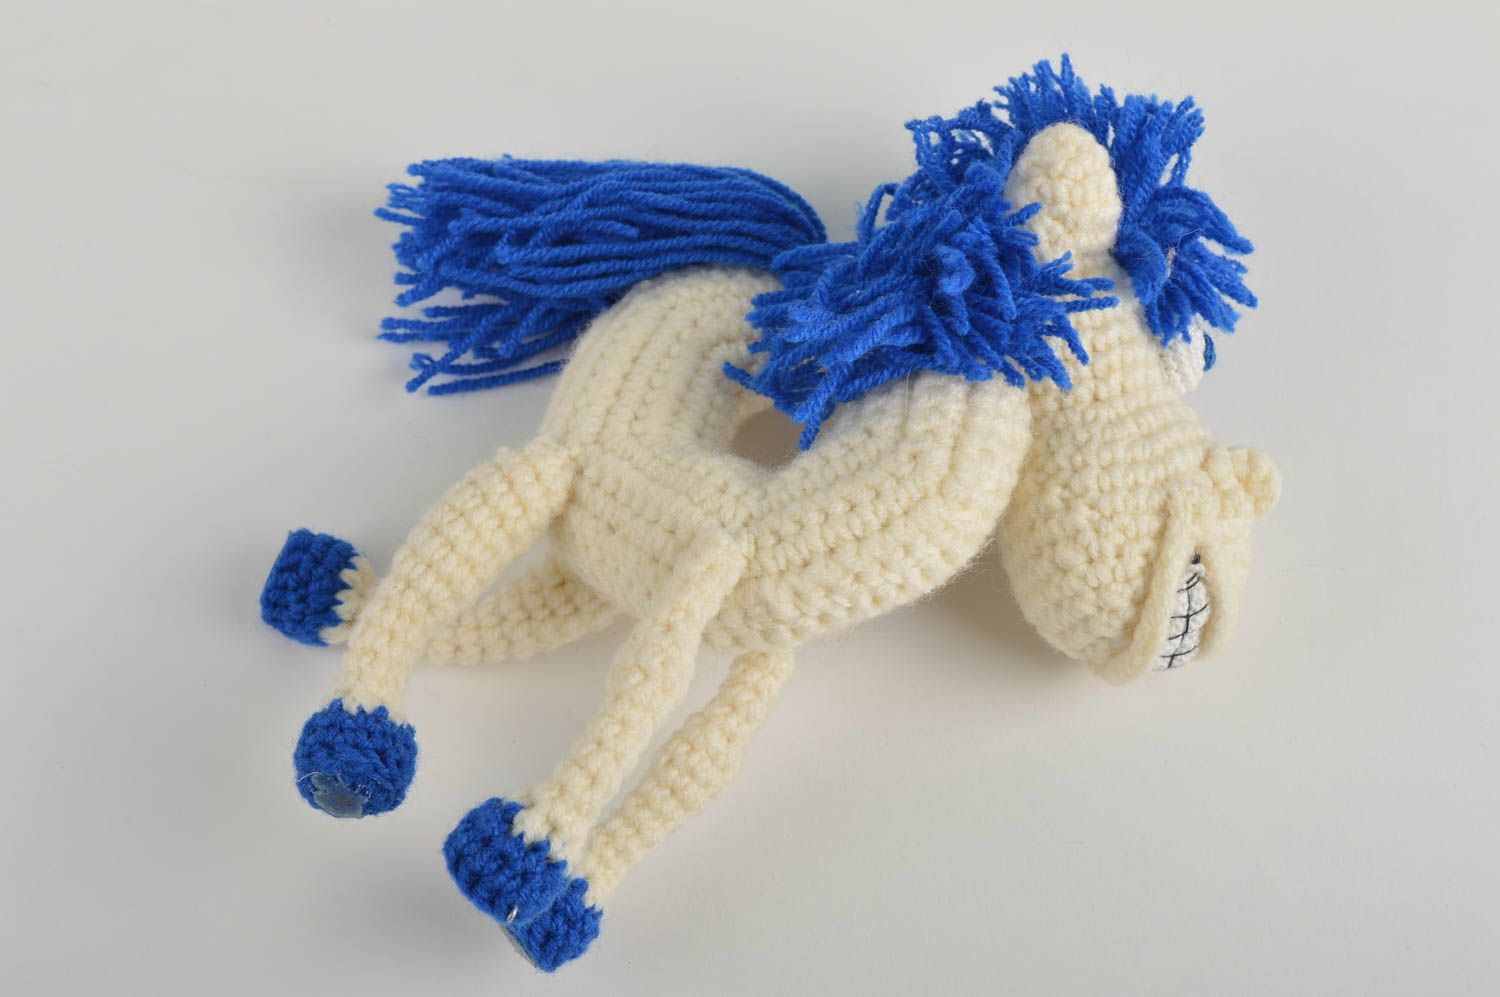 Beautiful handmade crochet toy soft childrens toys best toys for kids gift ideas photo 4